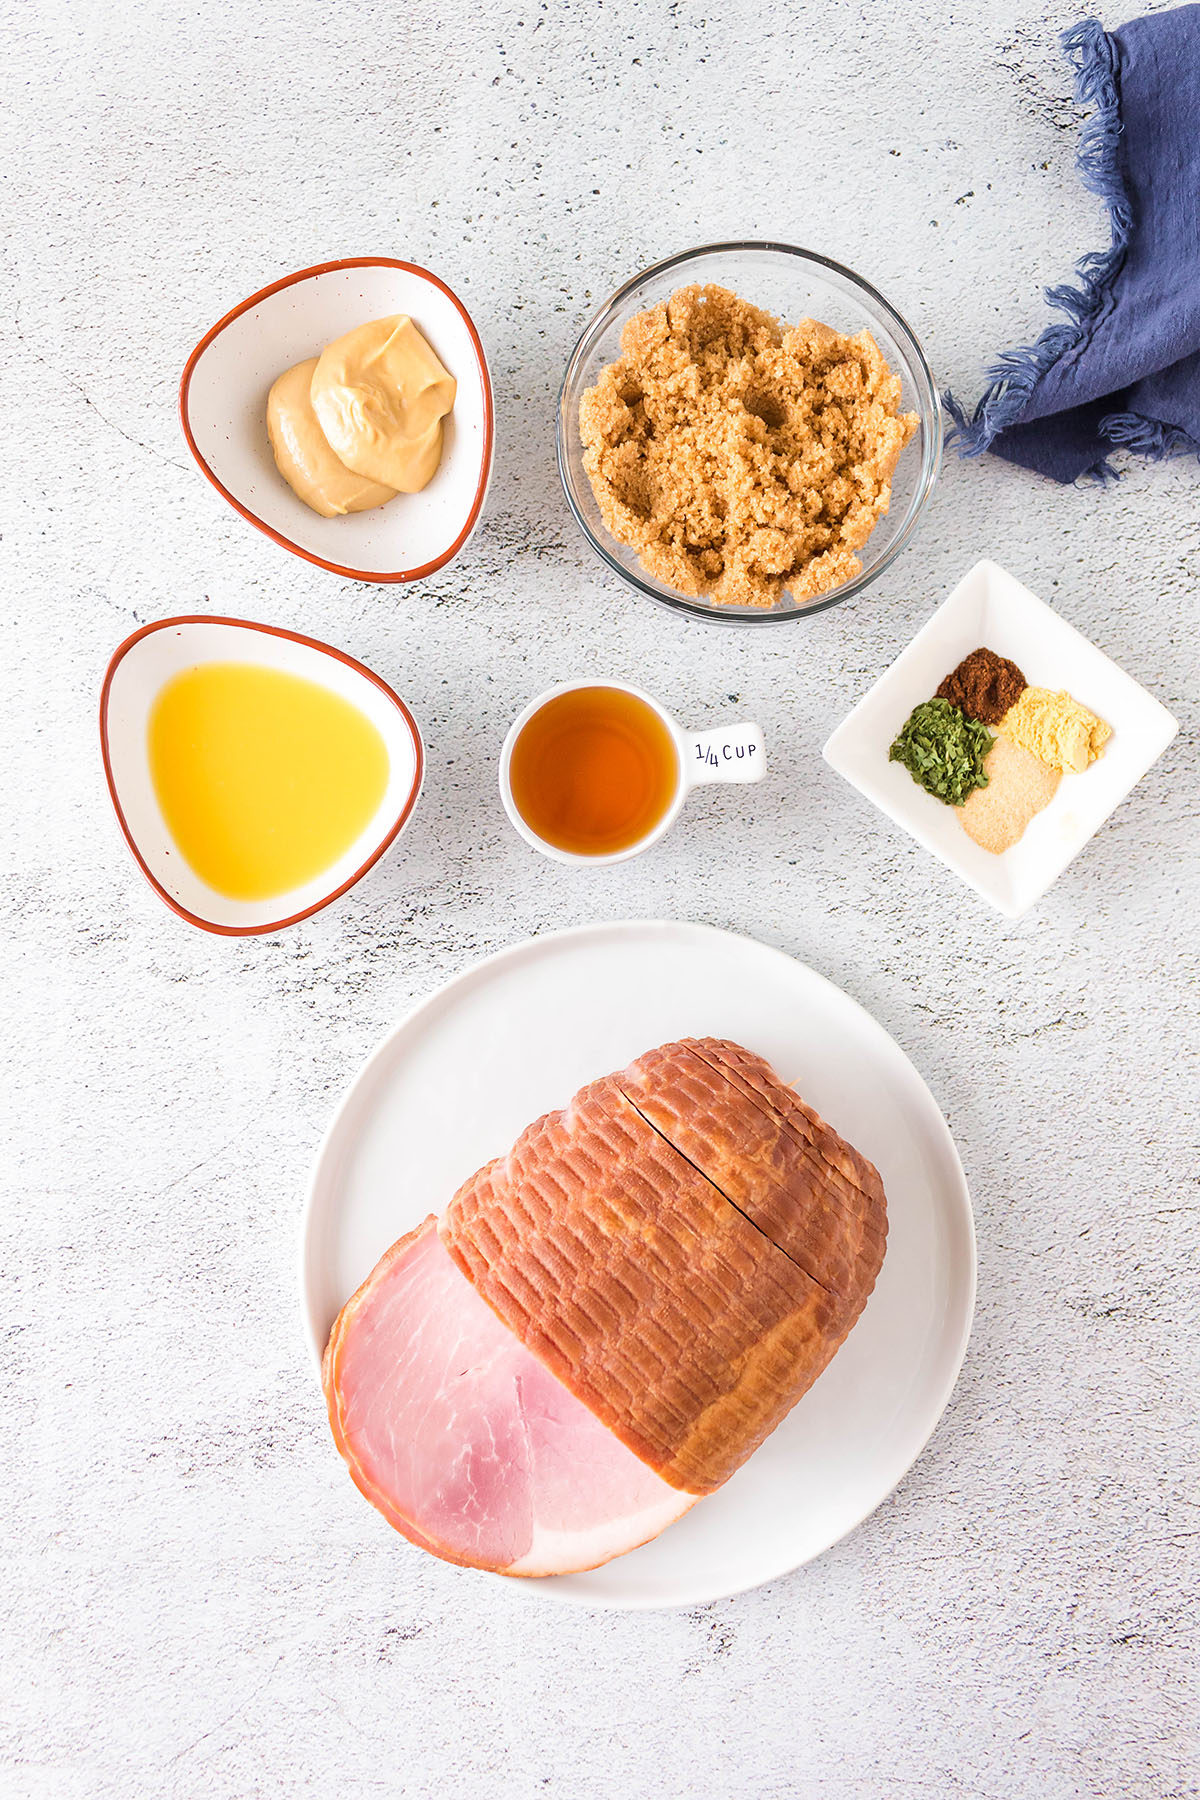 Homemade glazed ham ingredients spread out on a countertop.